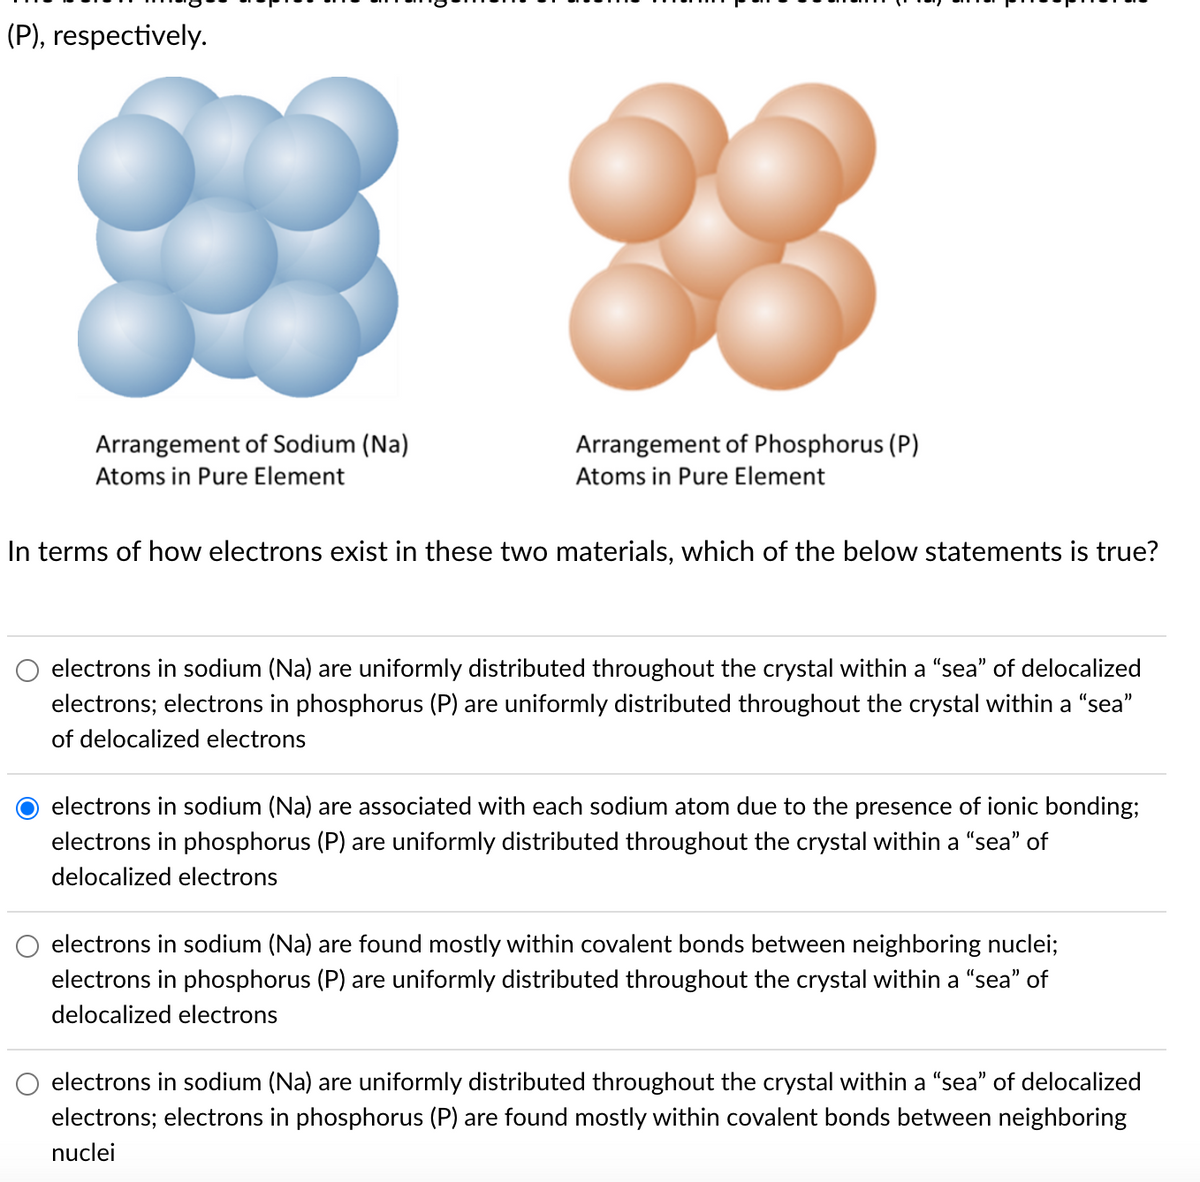 (P), respectively.
Arrangement of Sodium (Na)
Atoms in Pure Element
88
Arrangement of Phosphorus (P)
Atoms in Pure Element
In terms of how electrons exist in these two materials, which of the below statements is true?
electrons in sodium (Na) are uniformly distributed throughout the crystal within a "sea" of delocalized
electrons; electrons in phosphorus (P) are uniformly distributed throughout the crystal within a "sea"
of delocalized electrons
electrons in sodium (Na) are associated with each sodium atom due to the presence of ionic bonding;
electrons in phosphorus (P) are uniformly distributed throughout the crystal within a "sea" of
delocalized electrons
electrons in sodium (Na) are found mostly within covalent bonds between neighboring nuclei;
electrons in phosphorus (P) are uniformly distributed throughout the crystal within a "sea" of
delocalized electrons
electrons in sodium (Na) are uniformly distributed throughout the crystal within a "sea" of delocalized
electrons; electrons in phosphorus (P) are found mostly within covalent bonds between neighboring
nuclei